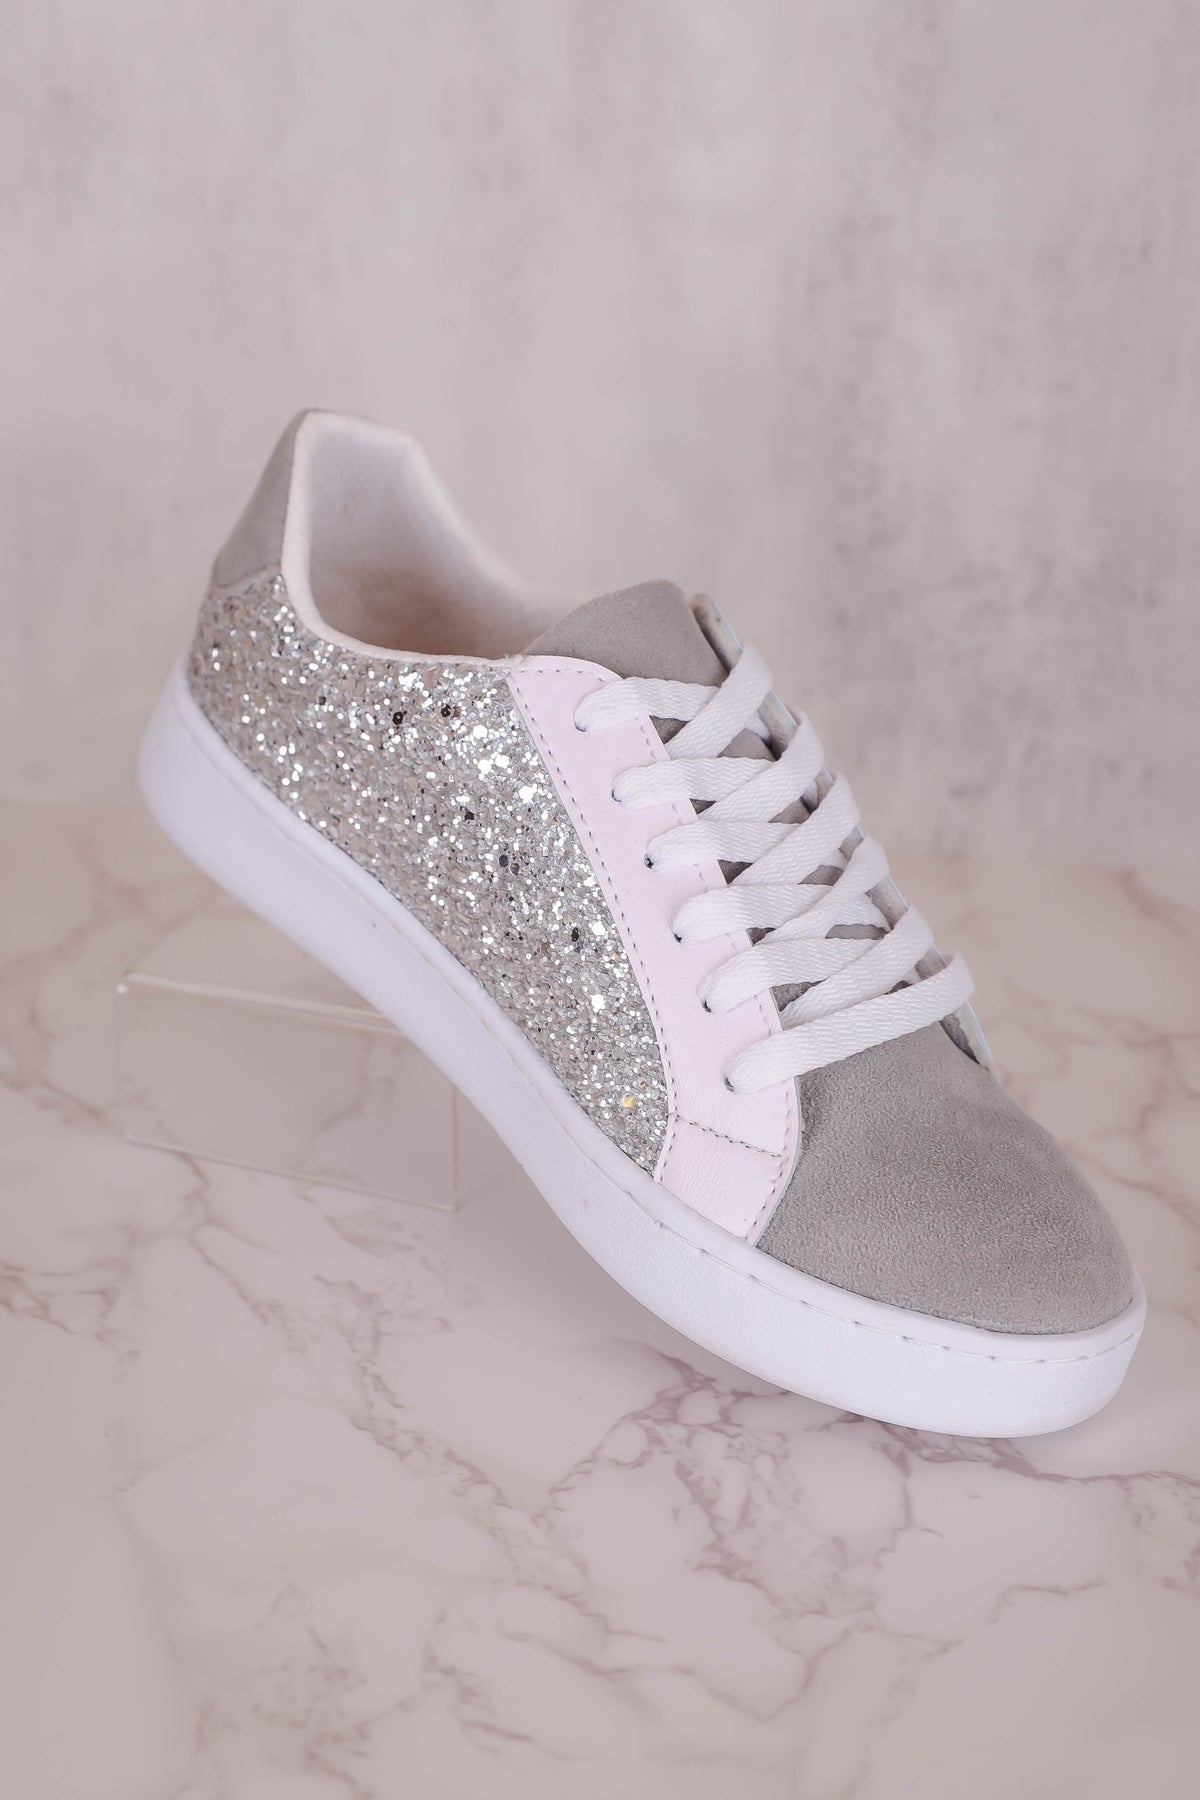 PUMA Turino Stacked Glitter Sneakers For Women - Buy PUMA Turino Stacked Glitter  Sneakers For Women Online at Best Price - Shop Online for Footwears in  India | Flipkart.com